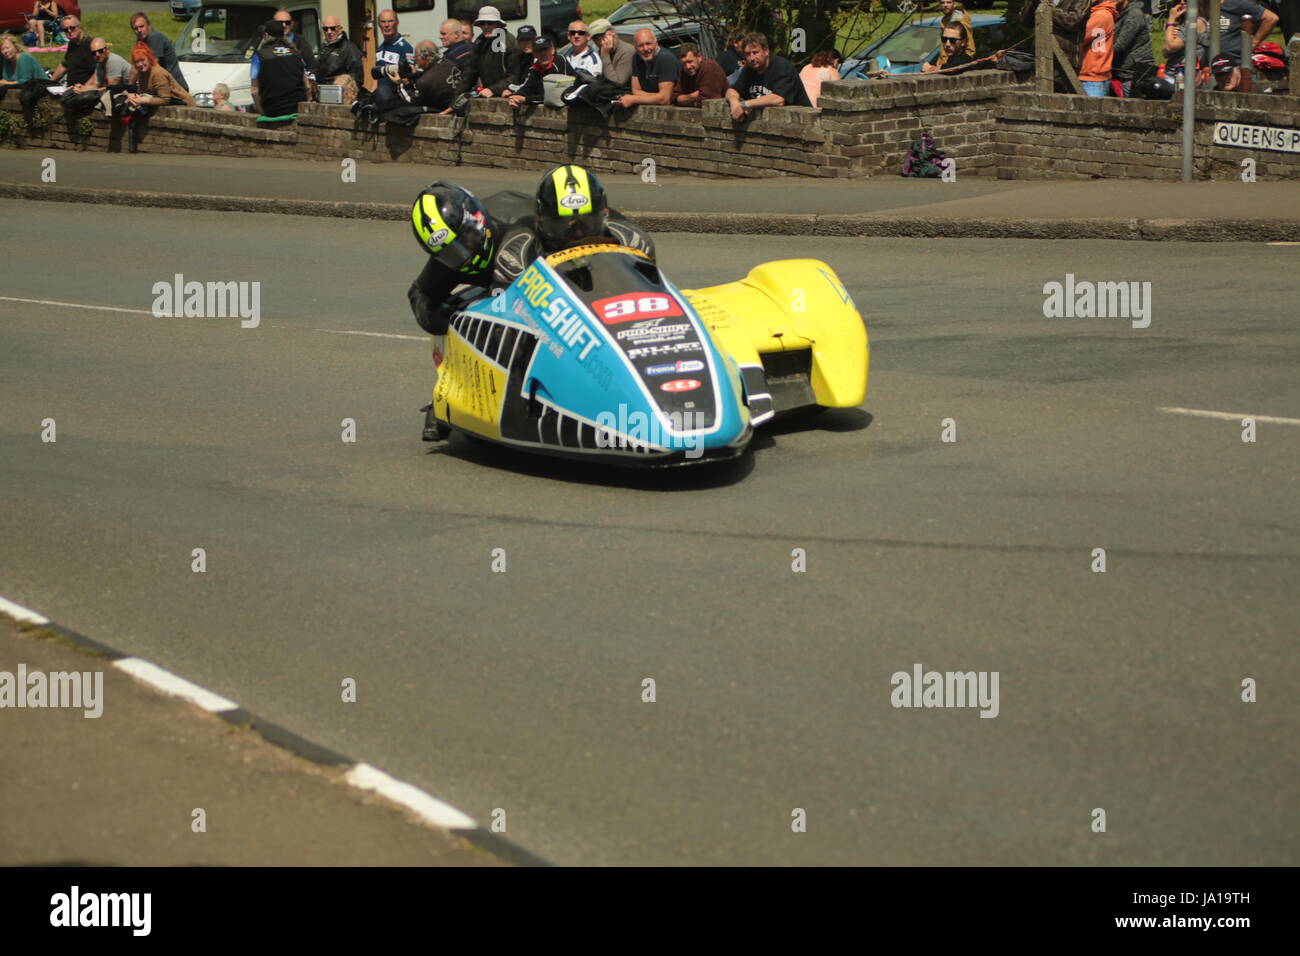 Isle of Man TT Races, Sidecar Qualifying Practice Race, Saturday 3 June 2017. Sidecar qualifying session. Number 38, Roy Tansley and Darren Prentis on their 675cc MR Equipe Triumph from the Proshift.com / Mike Austin Racing team from Derby, UK. Credit: Eclectic Art and Photography/Alamy Live News Stock Photo